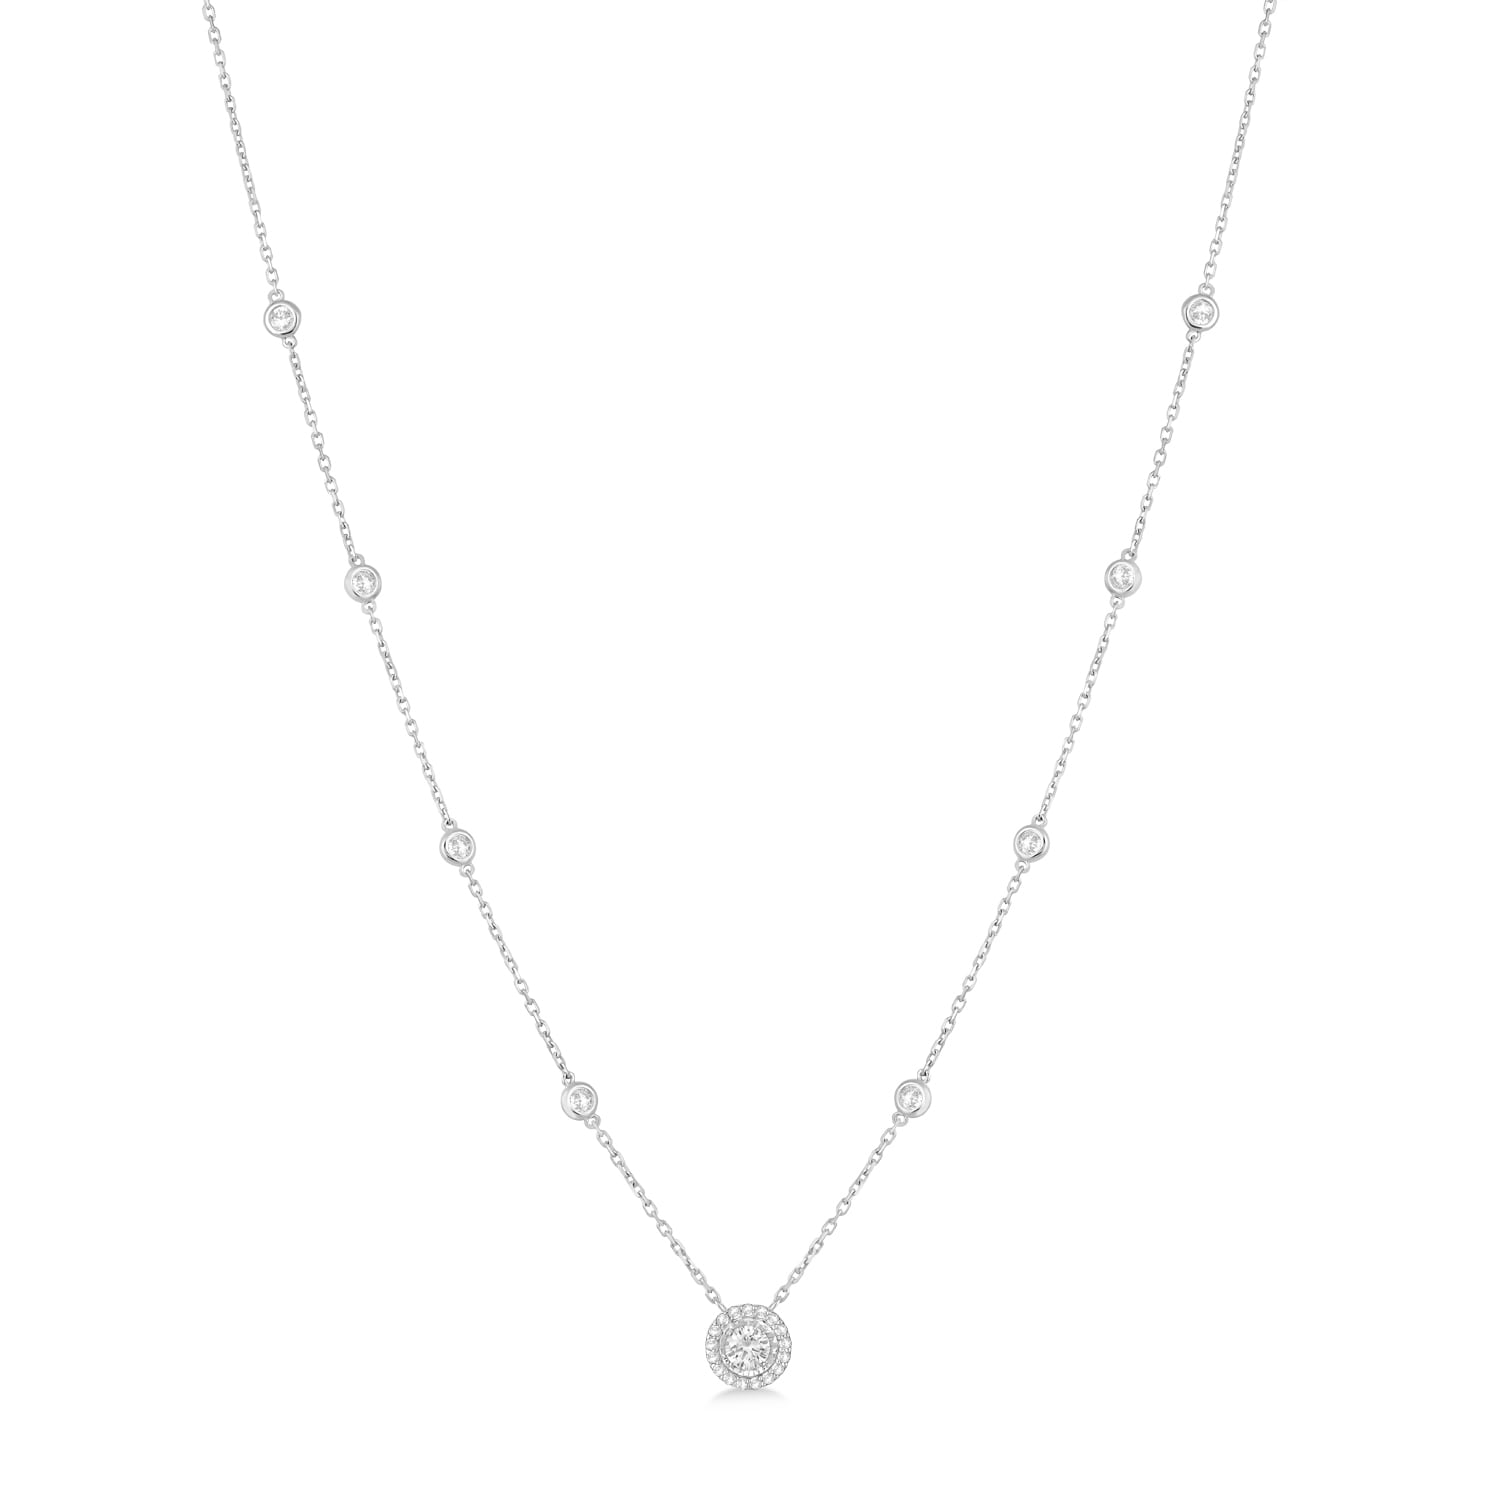 Diamond Halo Pendant Station Necklace in 14k White Gold (0.75 ctw)